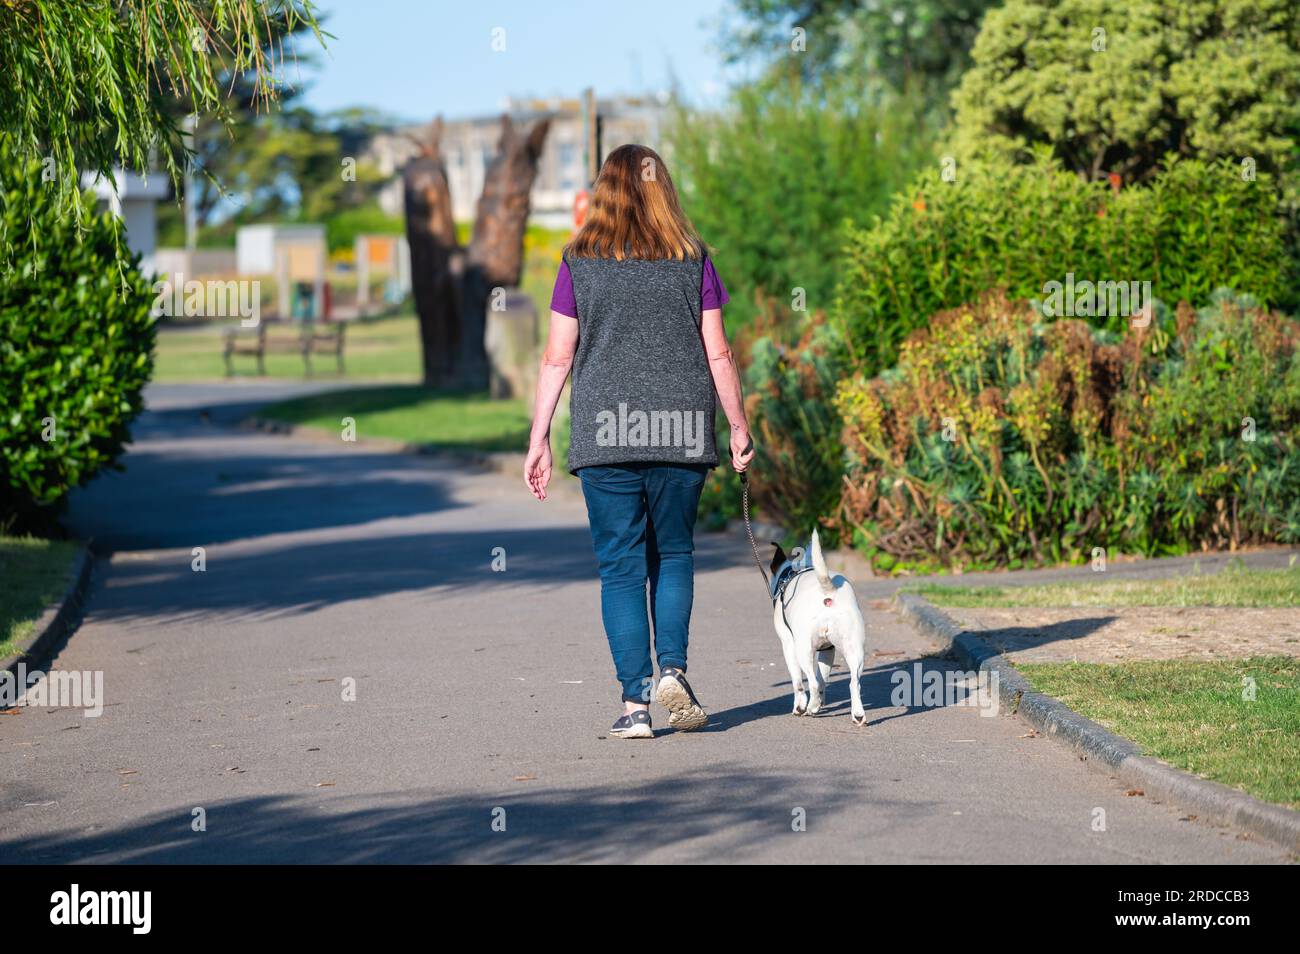 A woman walking a dog along a path in a park in Summer, UK. Stock Photo